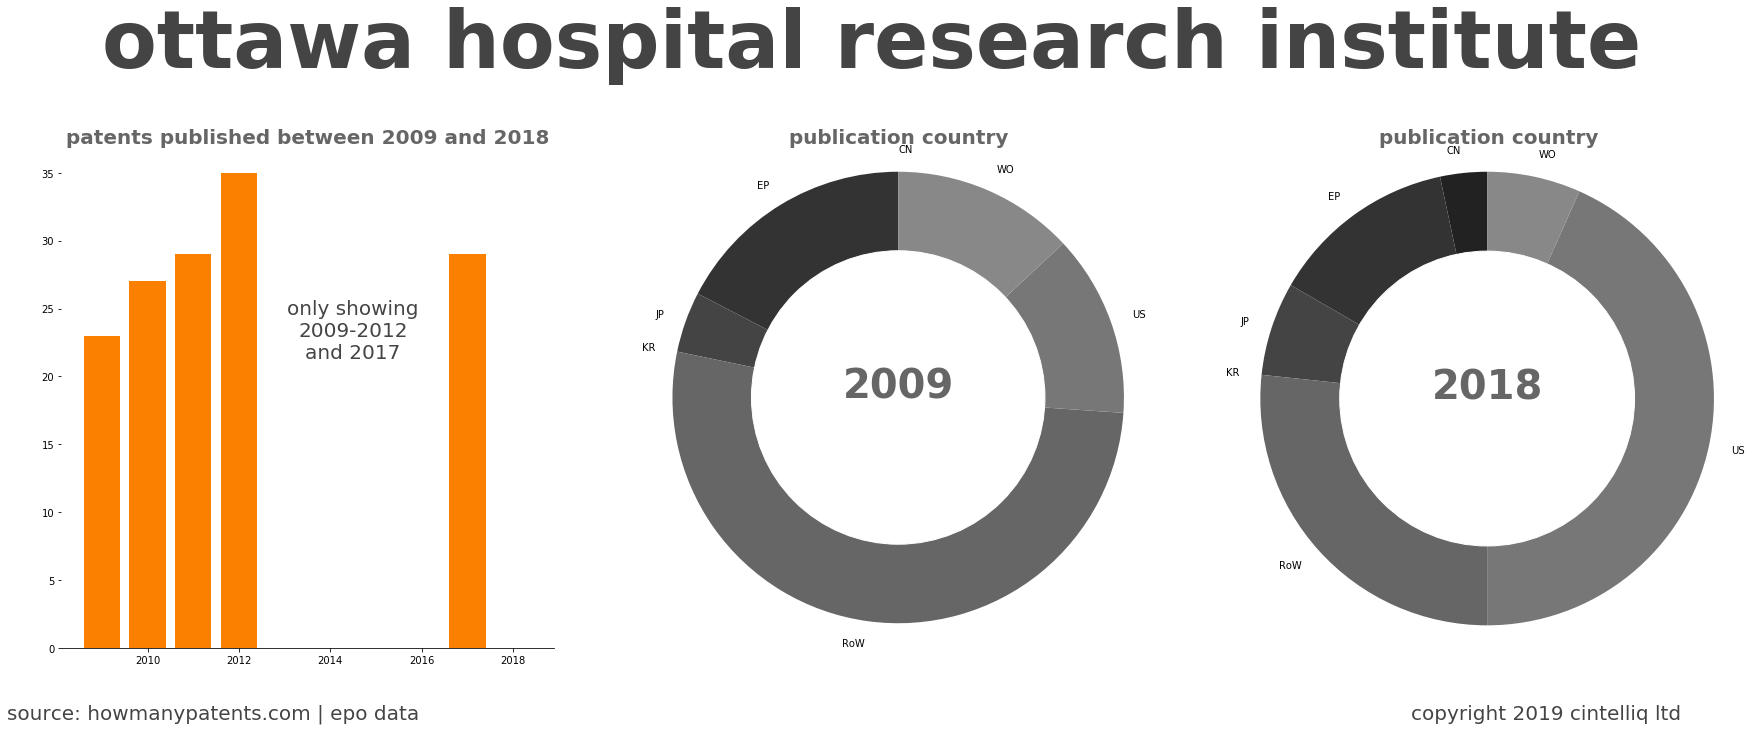 summary of patents for Ottawa Hospital Research Institute